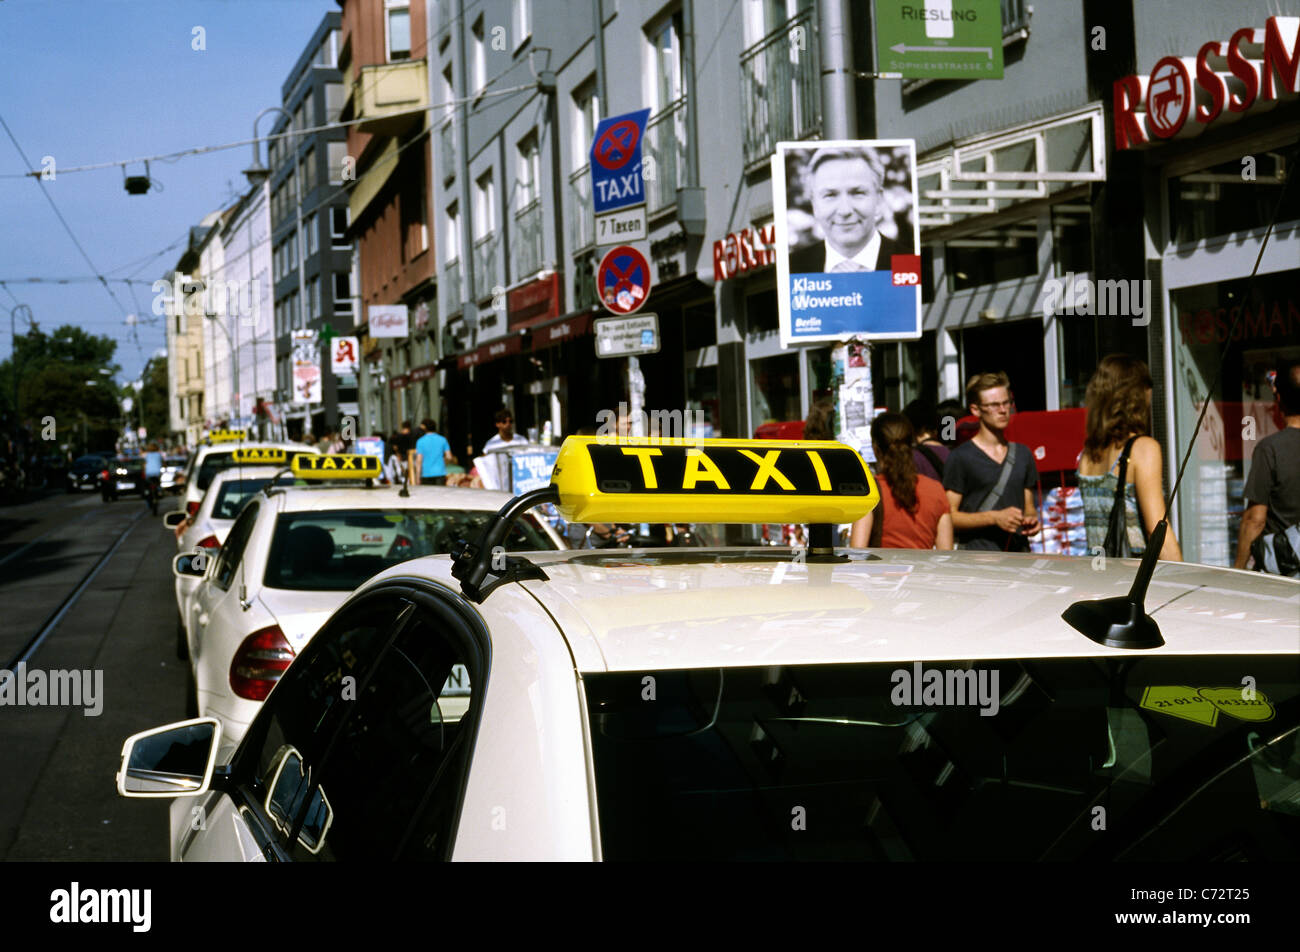 Taxis waiting for customers opposite Hackesche Höfe at Rosenthaler Strasse in Mitte district of Berlin. Stock Photo